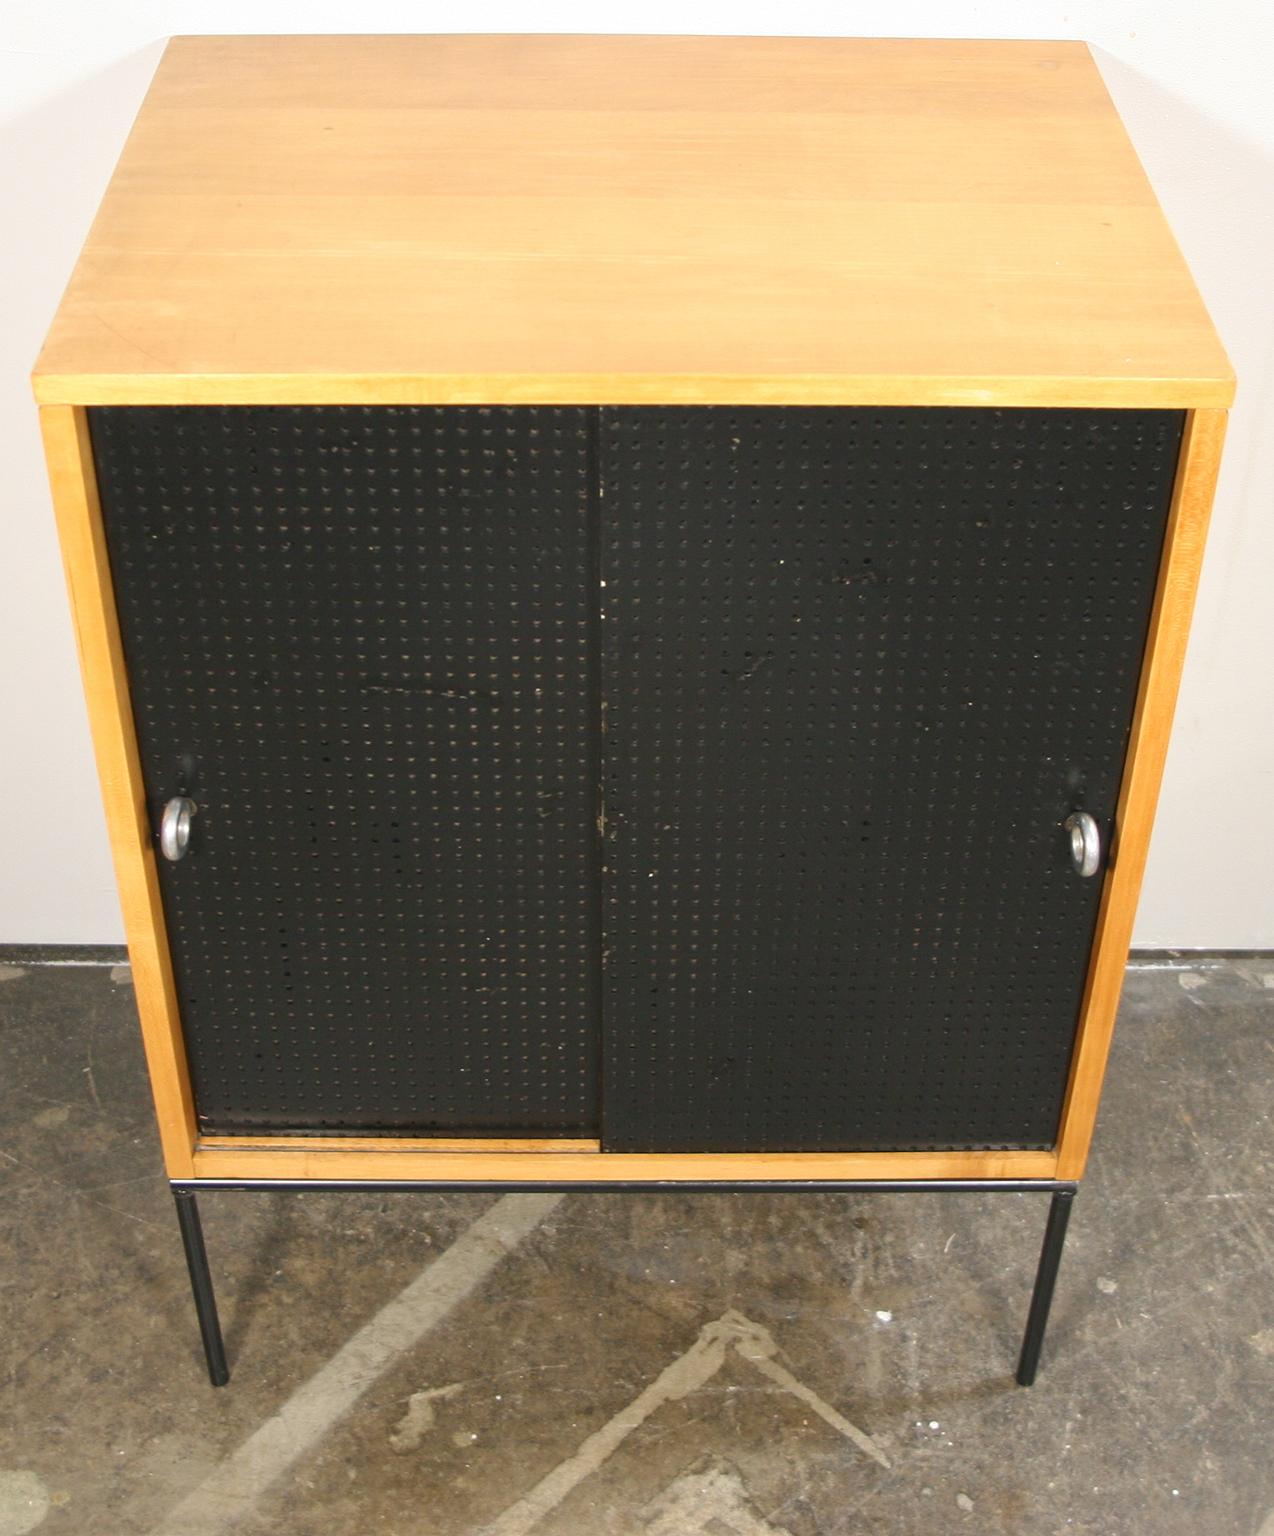 Beautiful midcentury small cabinet by Paul McCobb circa 1950 planner group #1512 has 1 shelve - solid maple construction has a blonde lacquer finish. Has very rare all original black fiberglass perforated sliding front doors with aluminum ring pulls